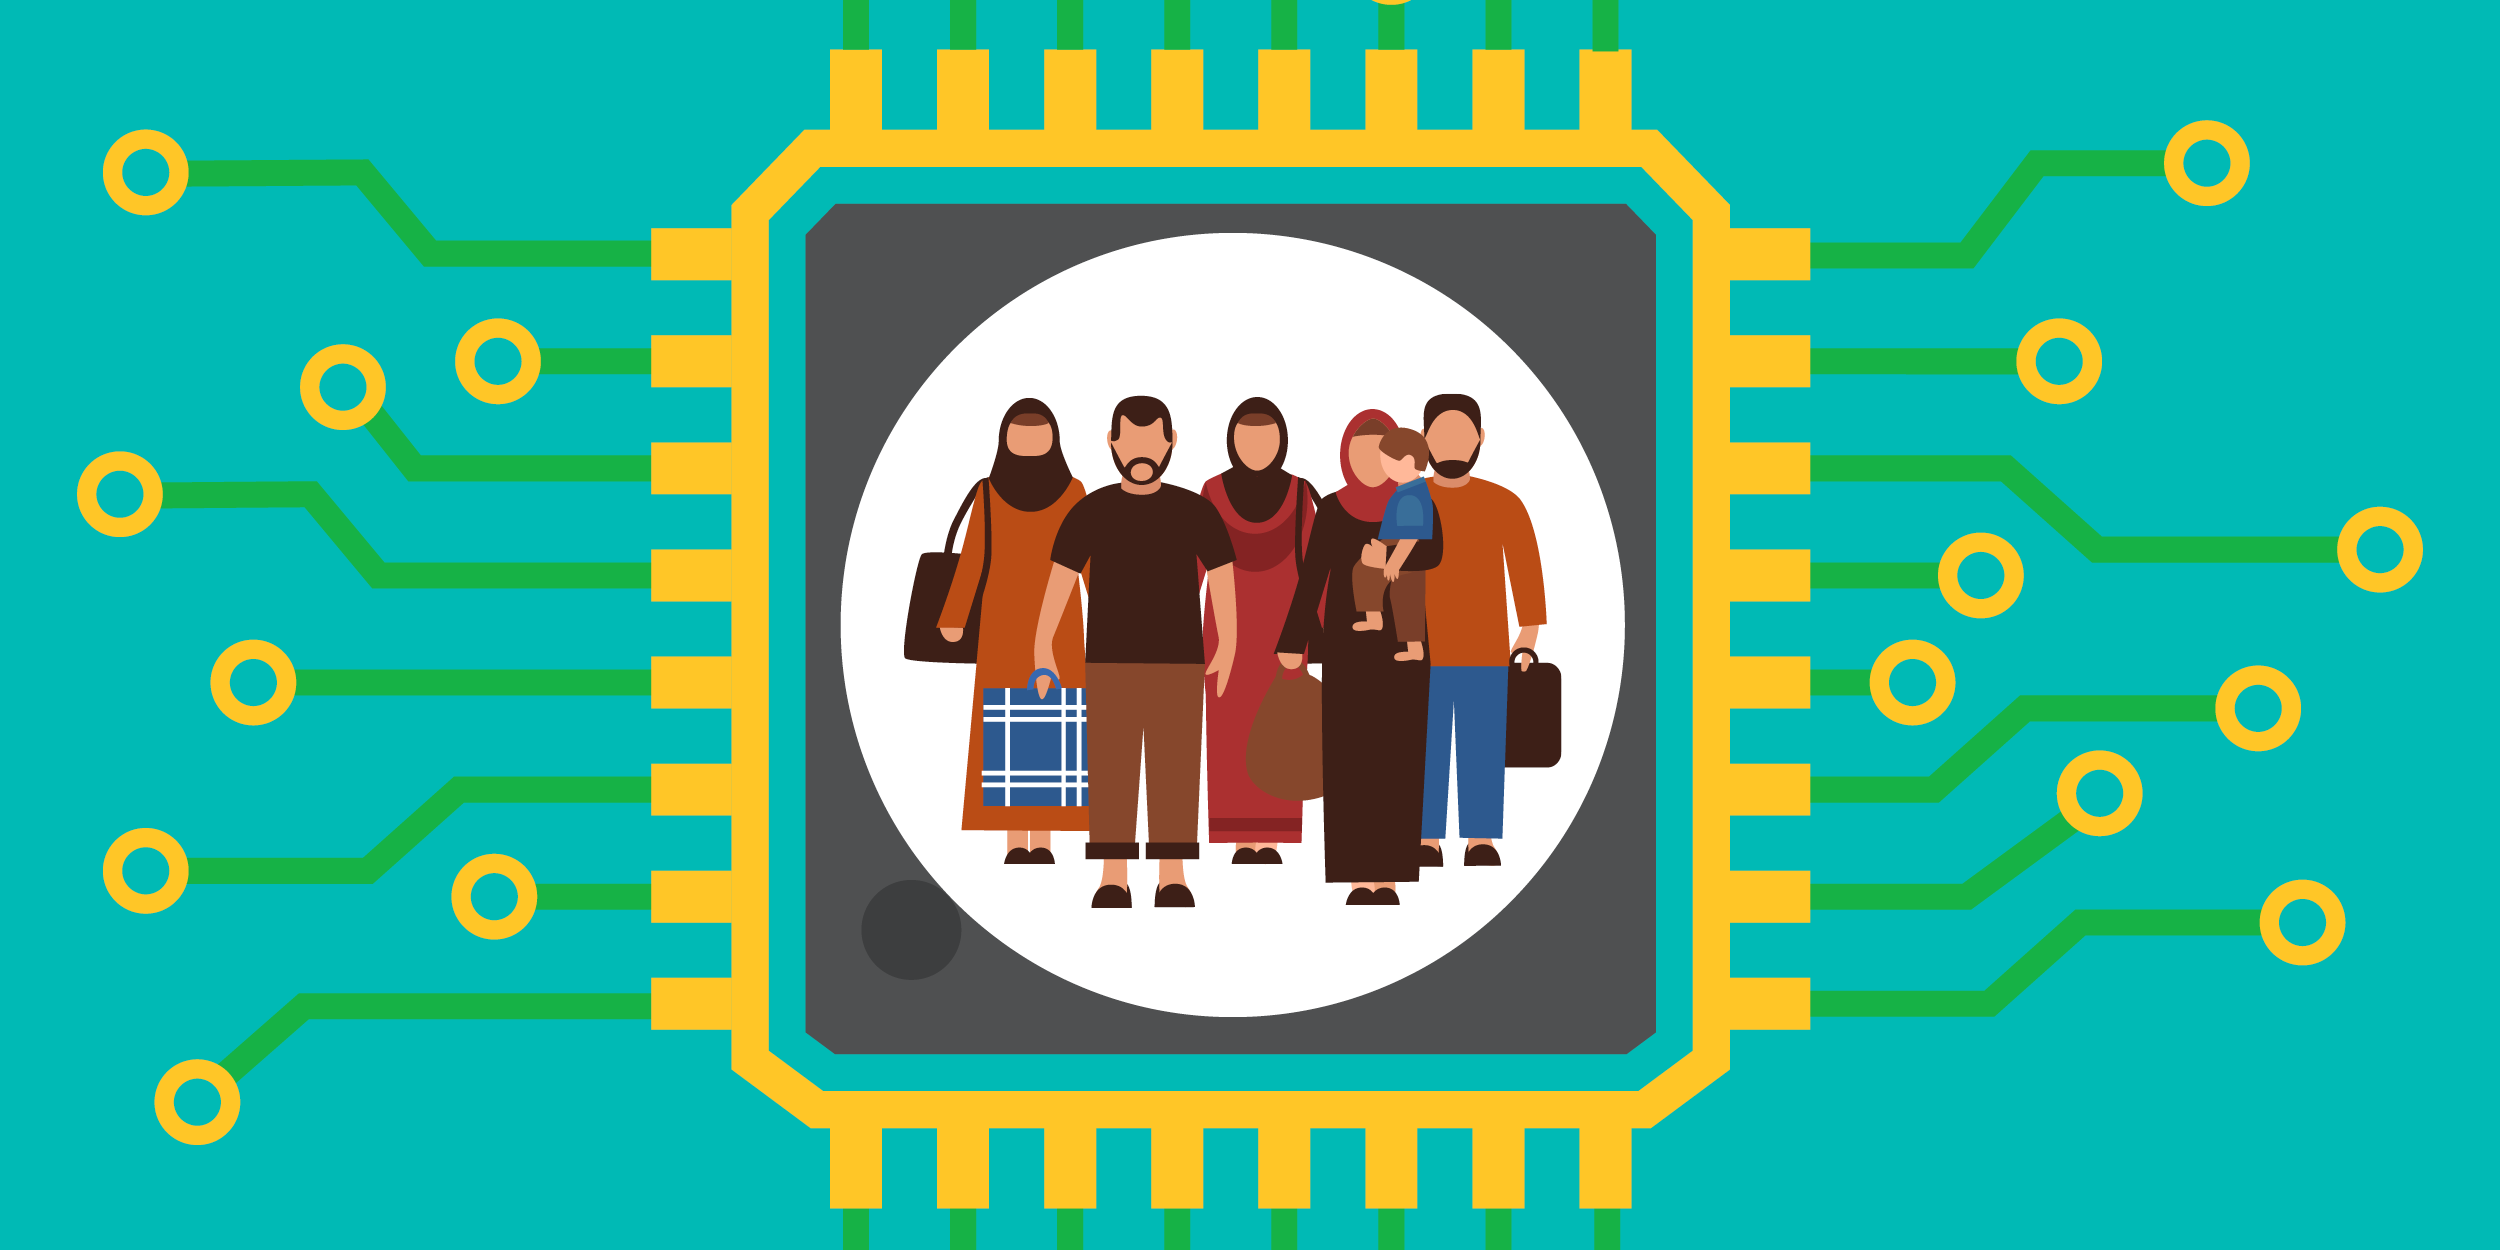 illustration of refugees being protected by a computer chip, symbolizing data security for nonprofits who work with refugees